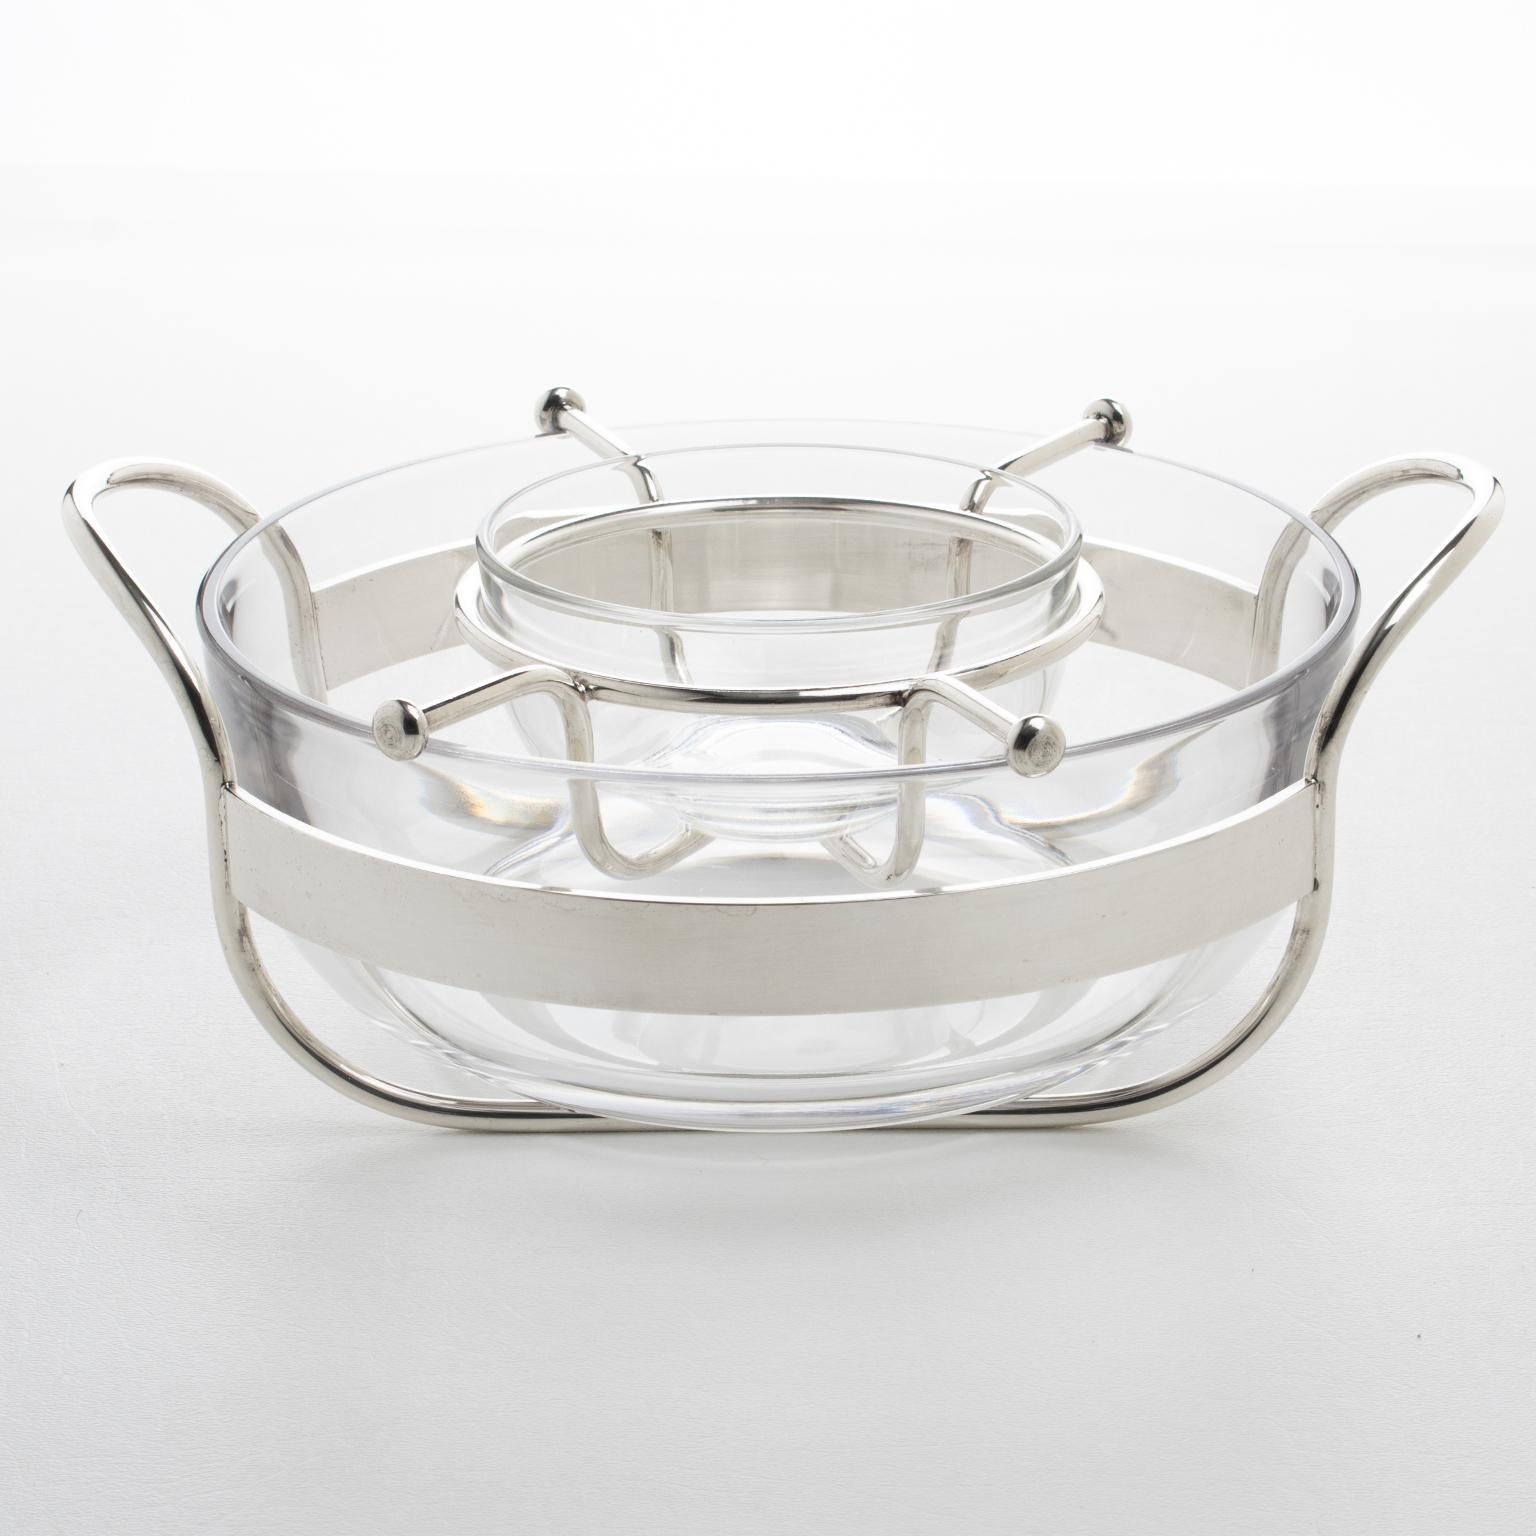 Italian silversmith company P.M. designed this luxury modernist silver plate and crystal caviar serving bowl, dish, or chiller in the 1980s. The minimalist chic design features a neat round shape with a substantial crystal container and silver plate